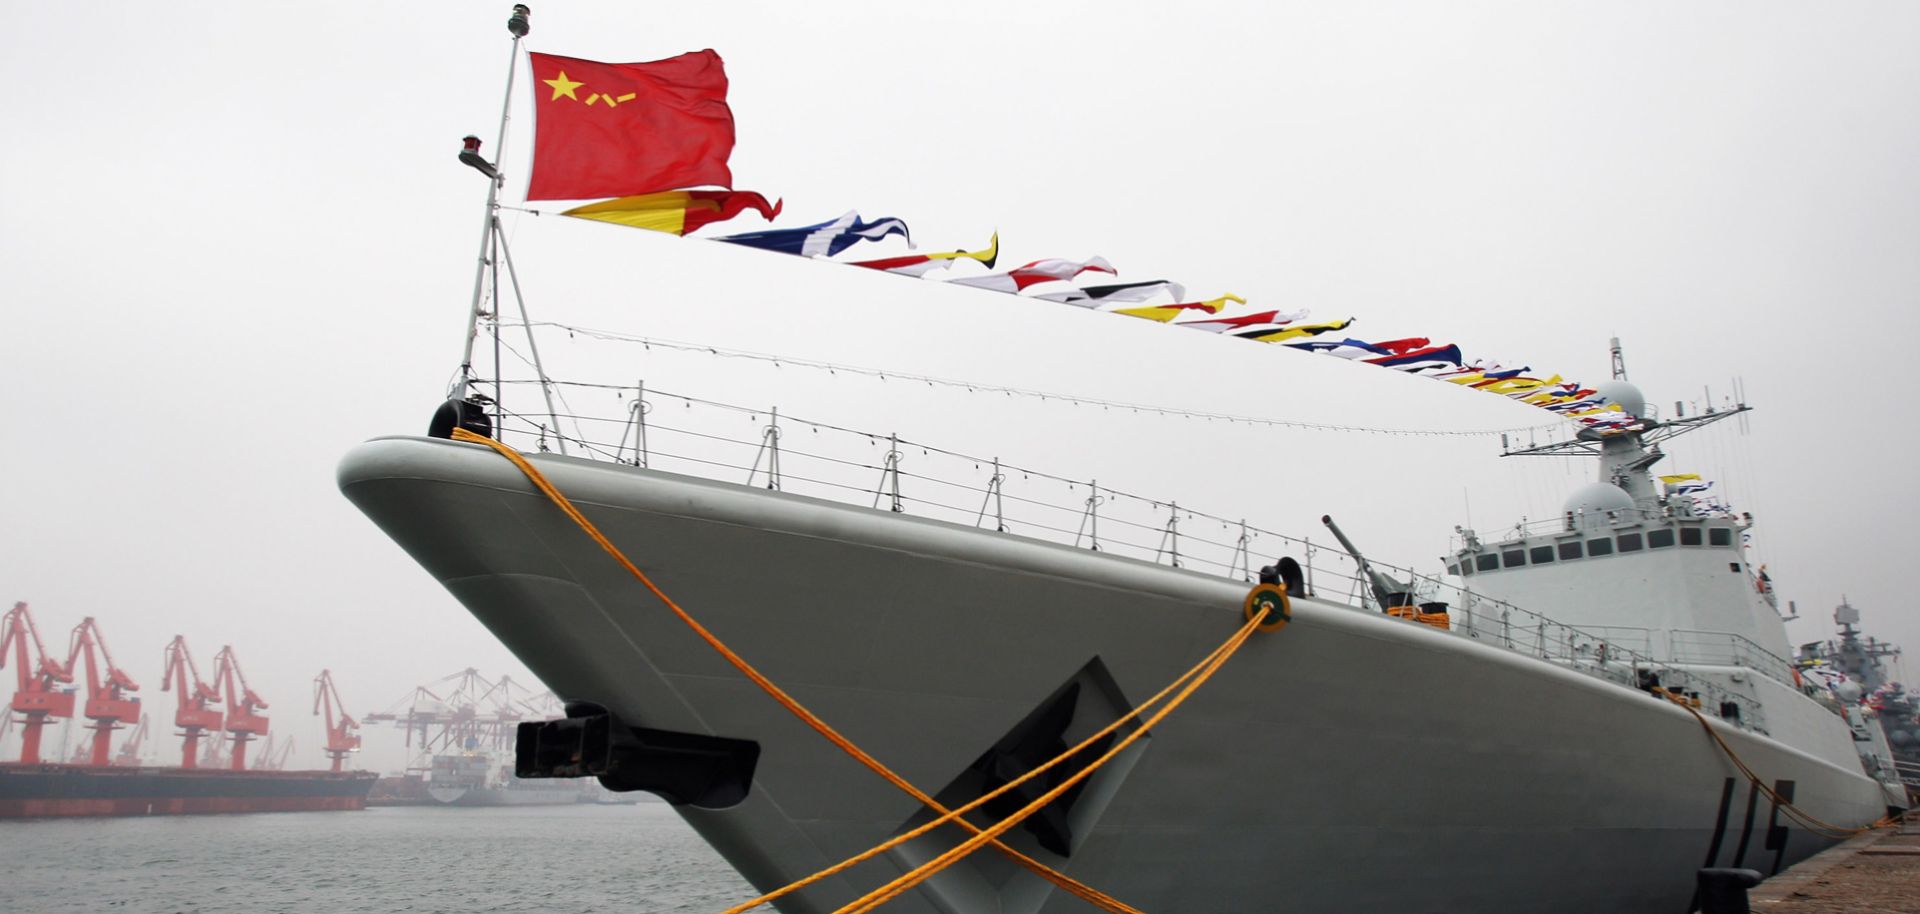 The Chinese Navy missile destroyer 115 Shenyang docks at the port of Qingdao, China, to celebrate the 60th anniversary of the founding of the People's Liberation Army Navy on April 20, 2009.